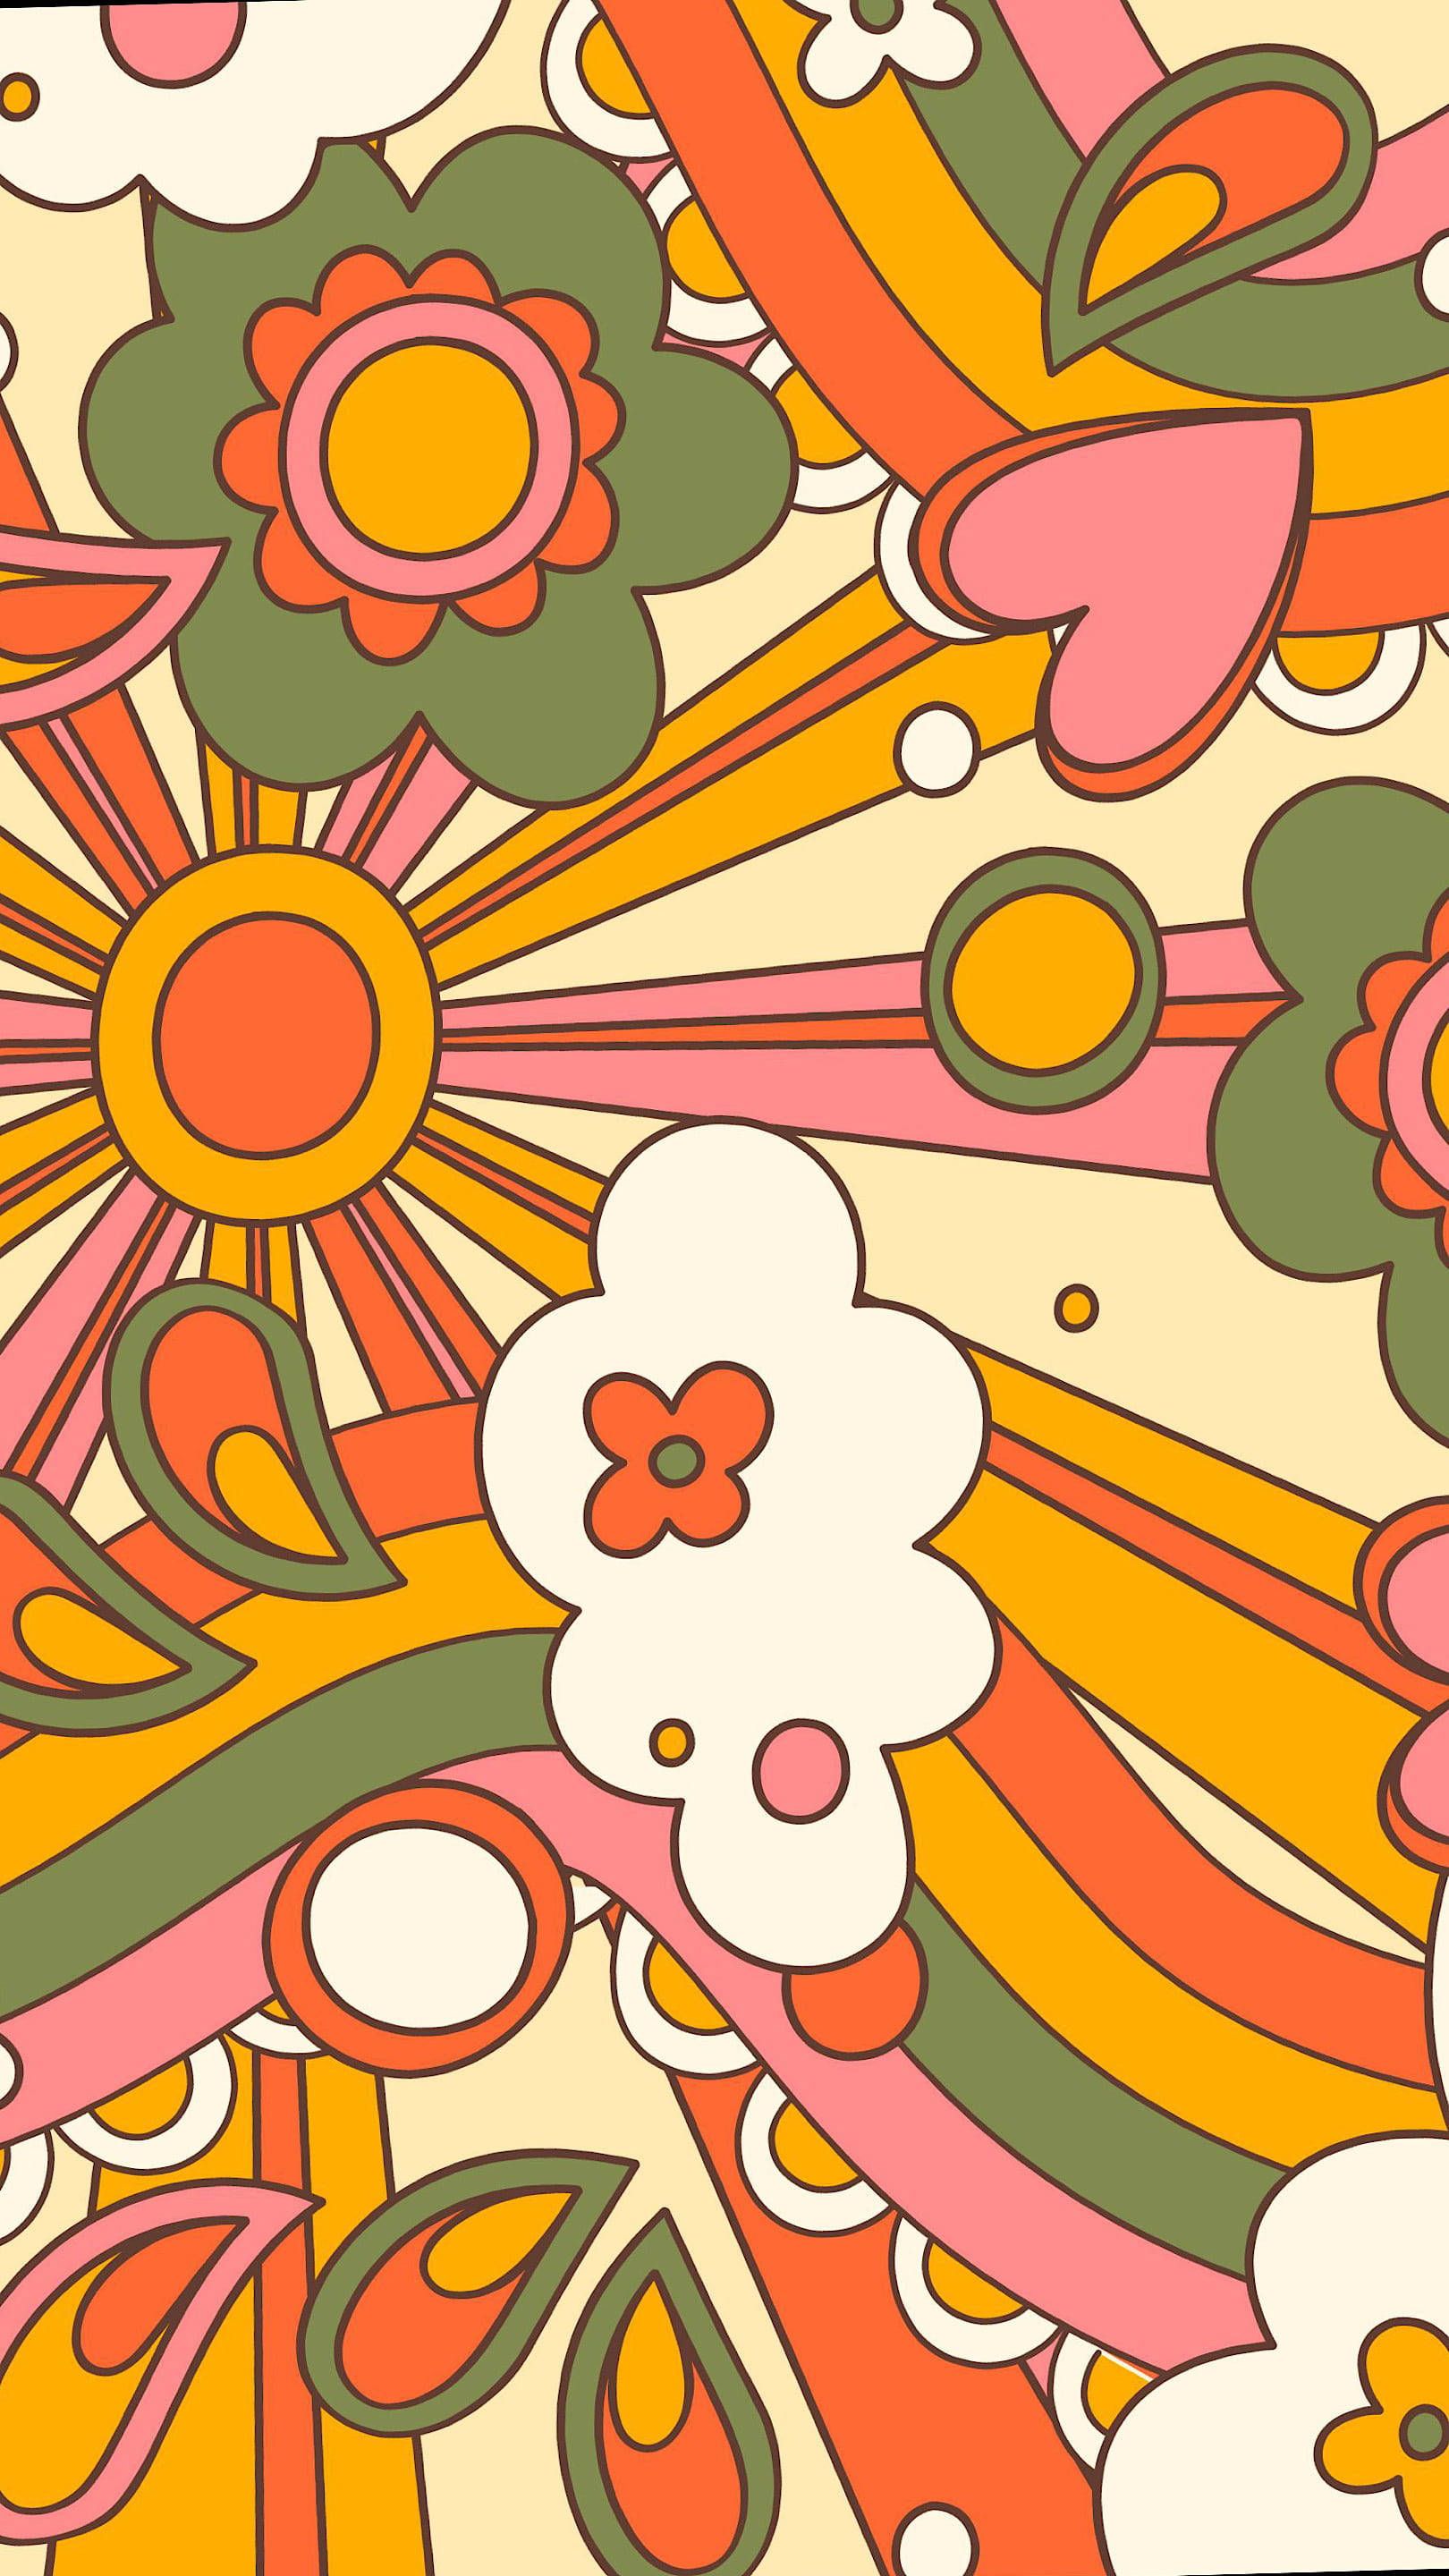 A colorful, psychedelic pattern with flowers and leaves - Sunshine, 70s, retro, 60s